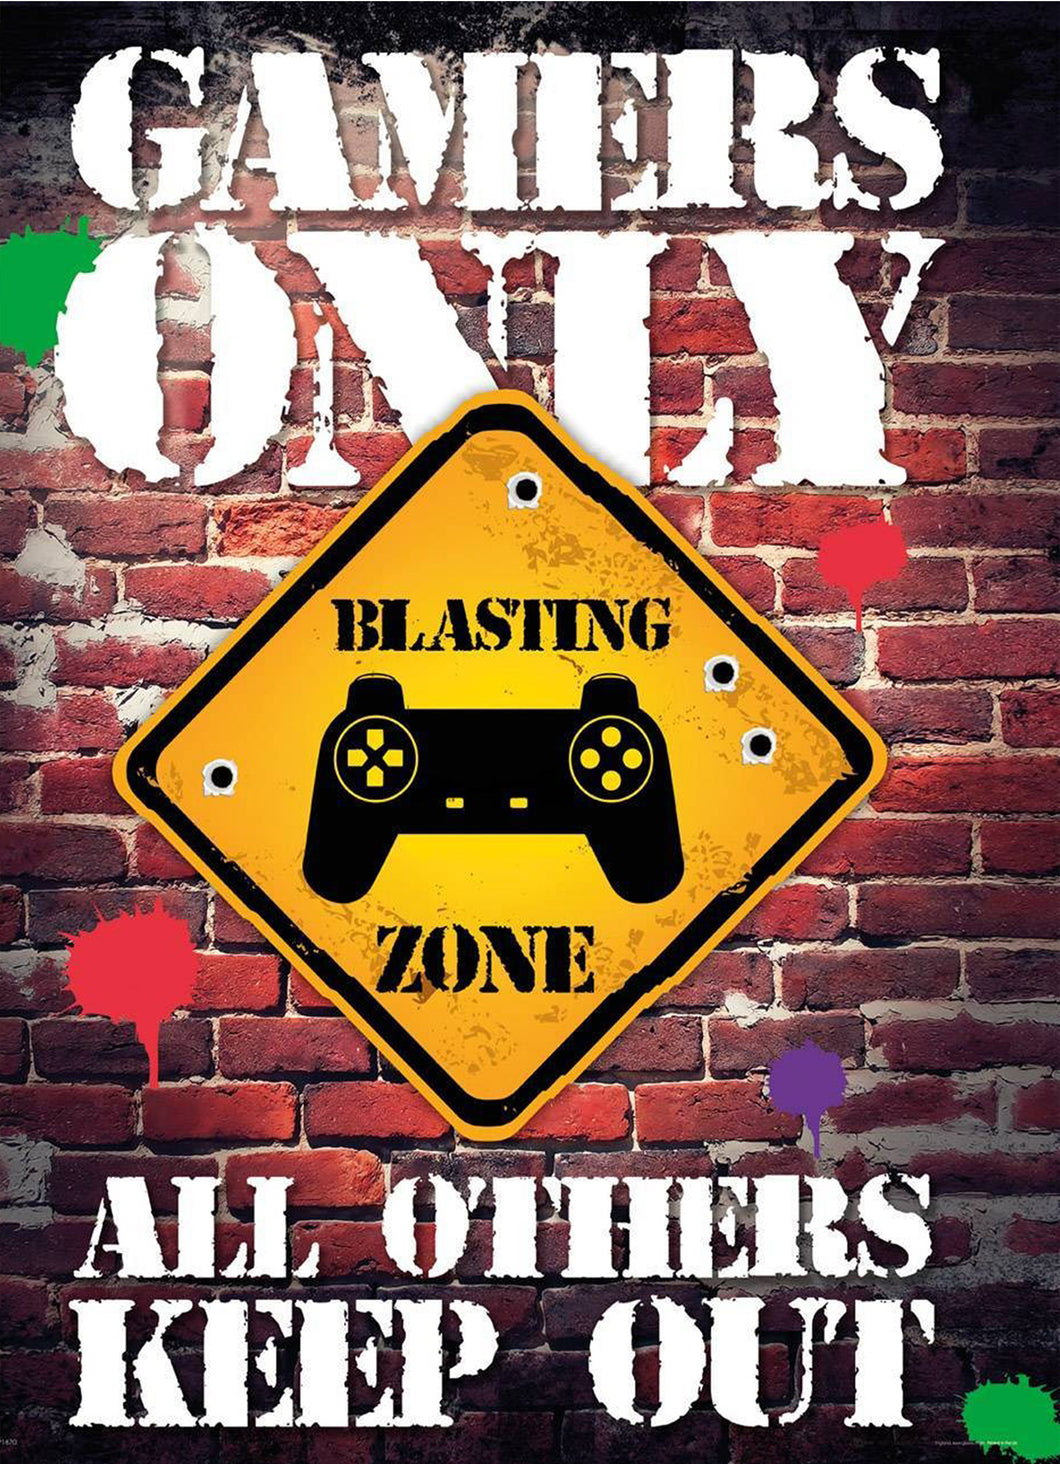 A4 gamers only controller keep out Gaming Poster High Quality Glossy Paper A1 A2 A3 A4 A3 Framed or Unframed!!!